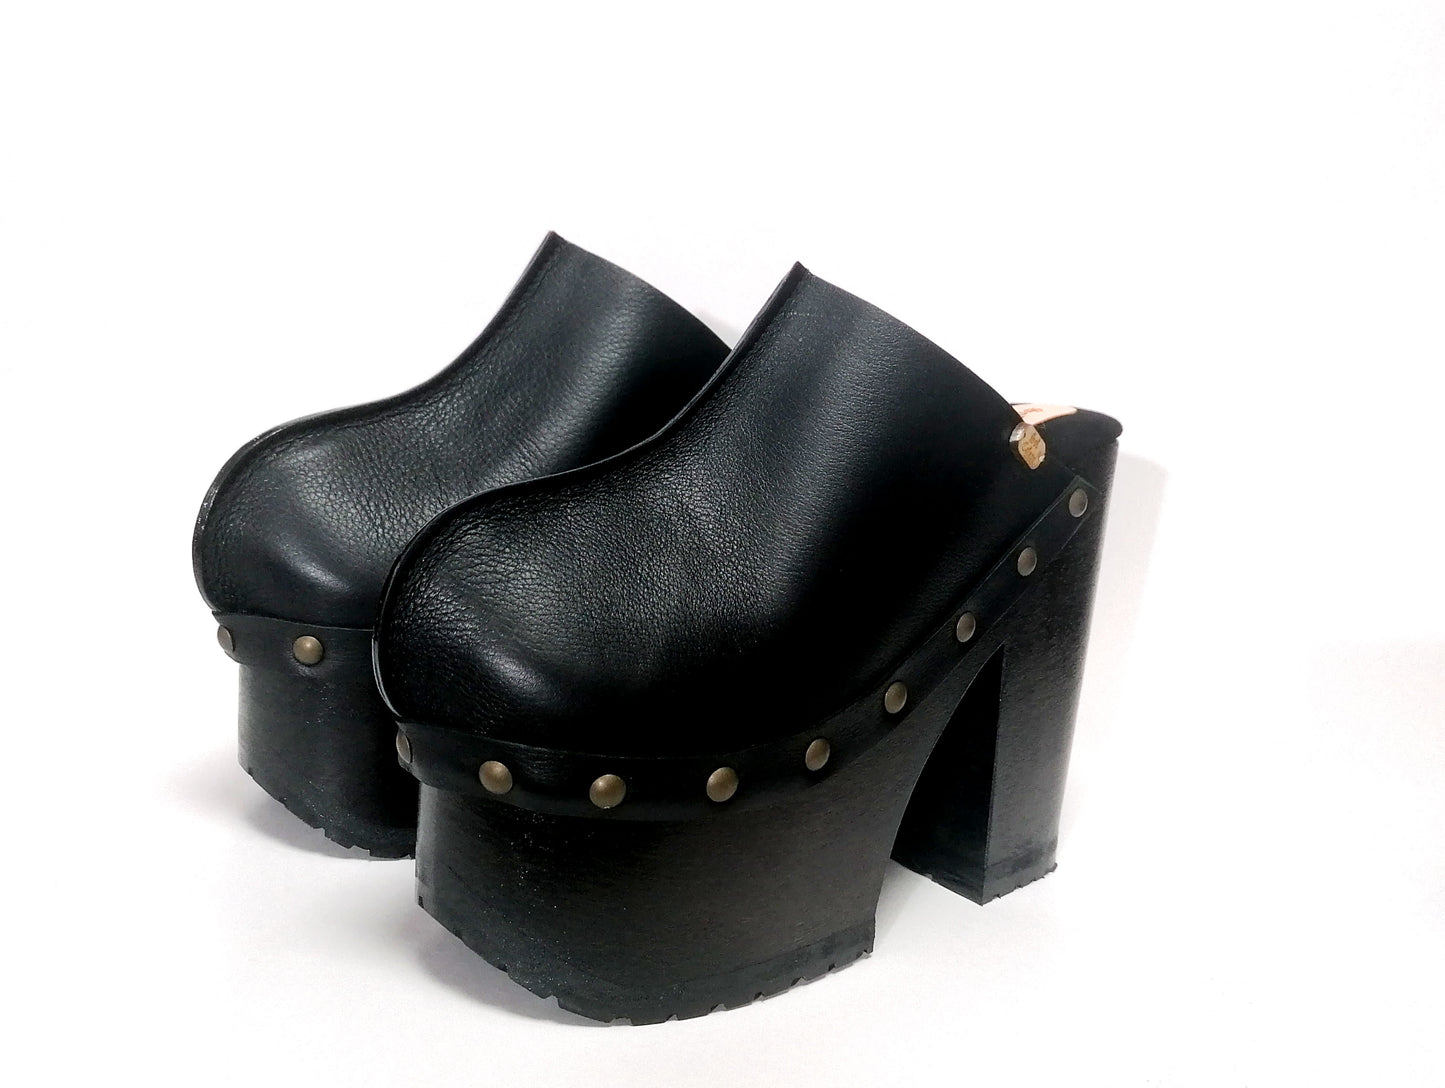 Black leather clogs with platform and super high heel. Leather mule with super high wooden heel. Black leather clogs 70's vintage style. Vintage style super high heel clogs. Sizes 34 to 47. High quality leather shoes handmade by sol Caleyo. Sustainable fashion.